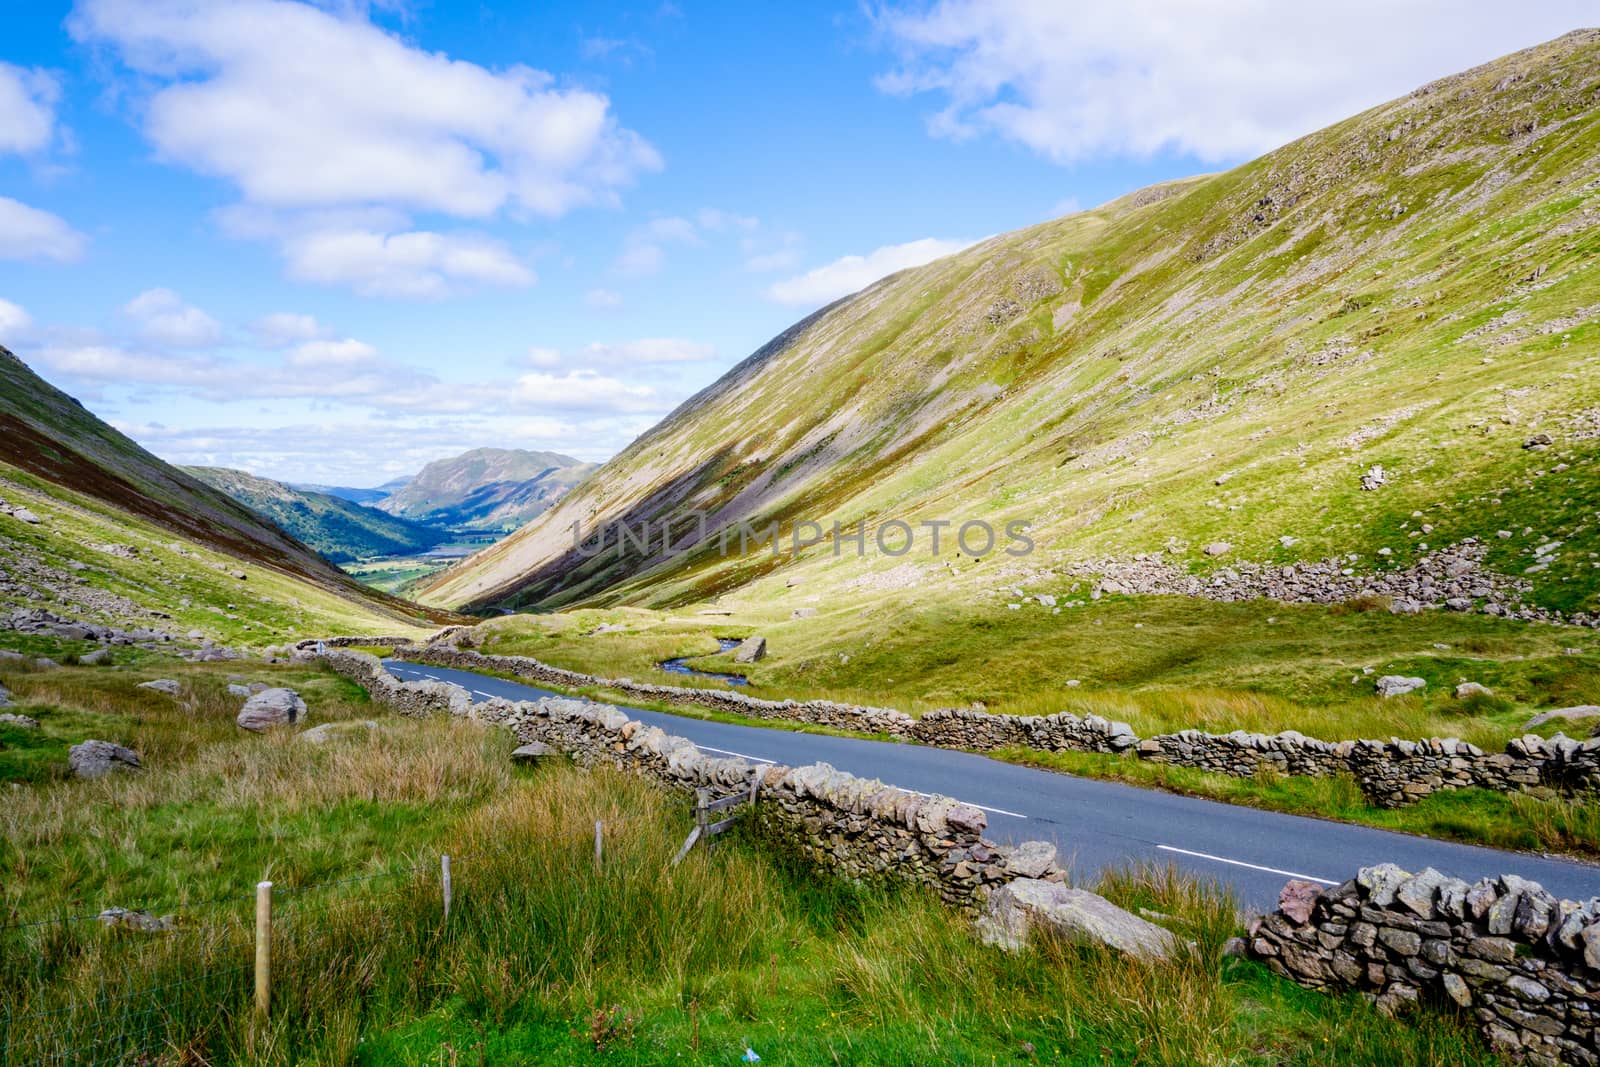 The Kirkstone Pass road in the English Lake District, UK